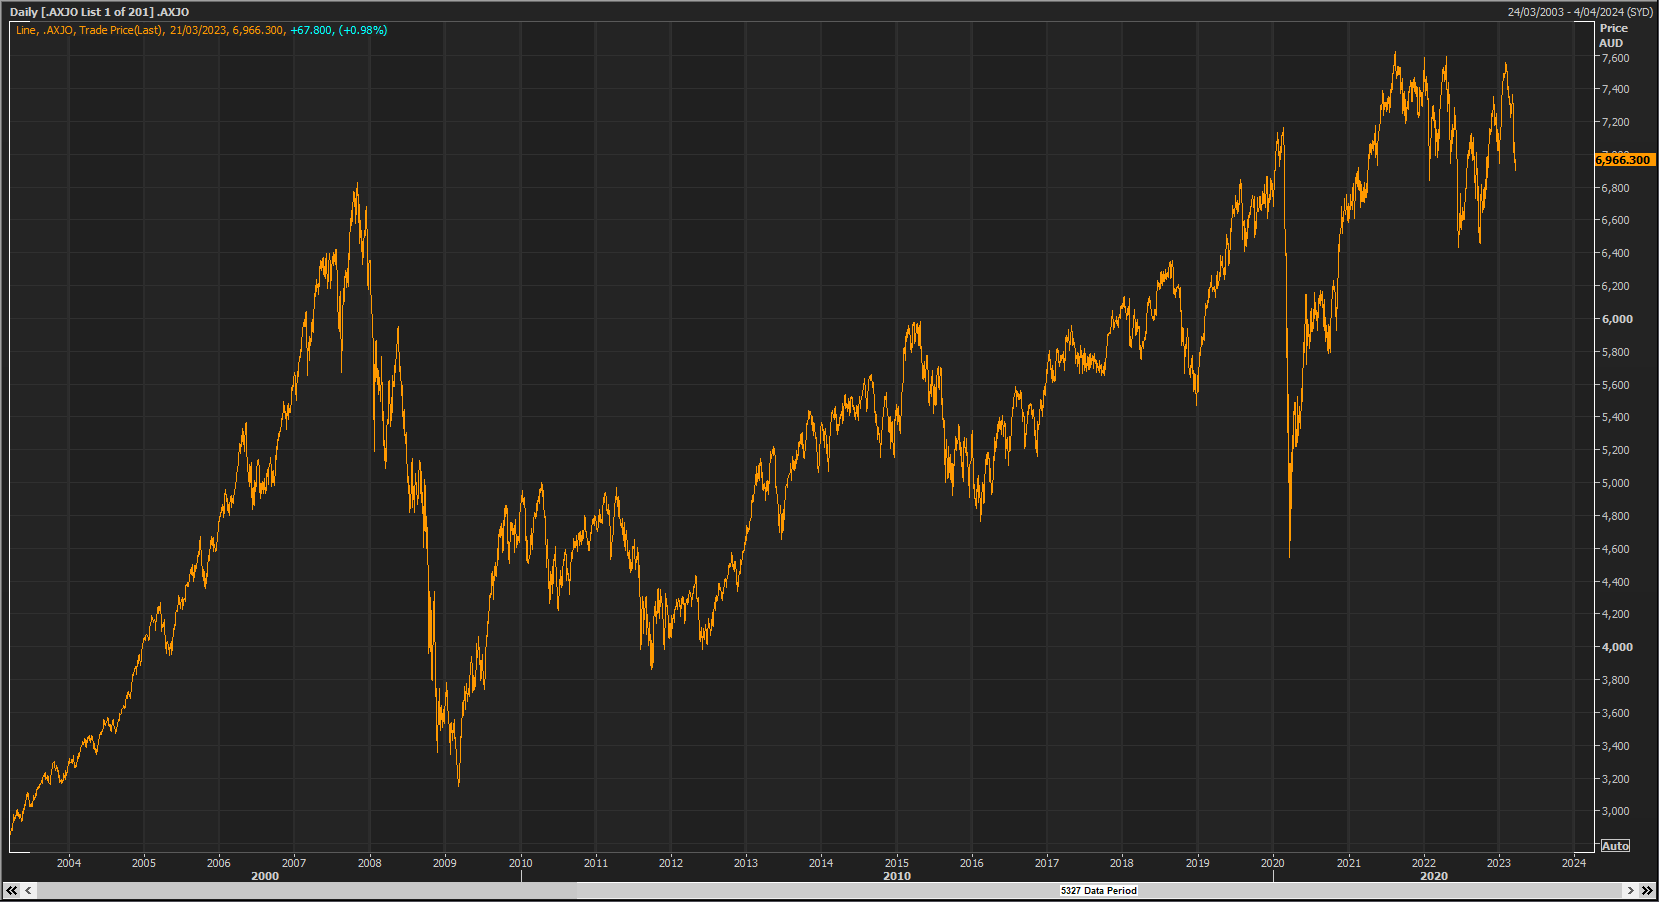 ASX 200 over the past 20 years